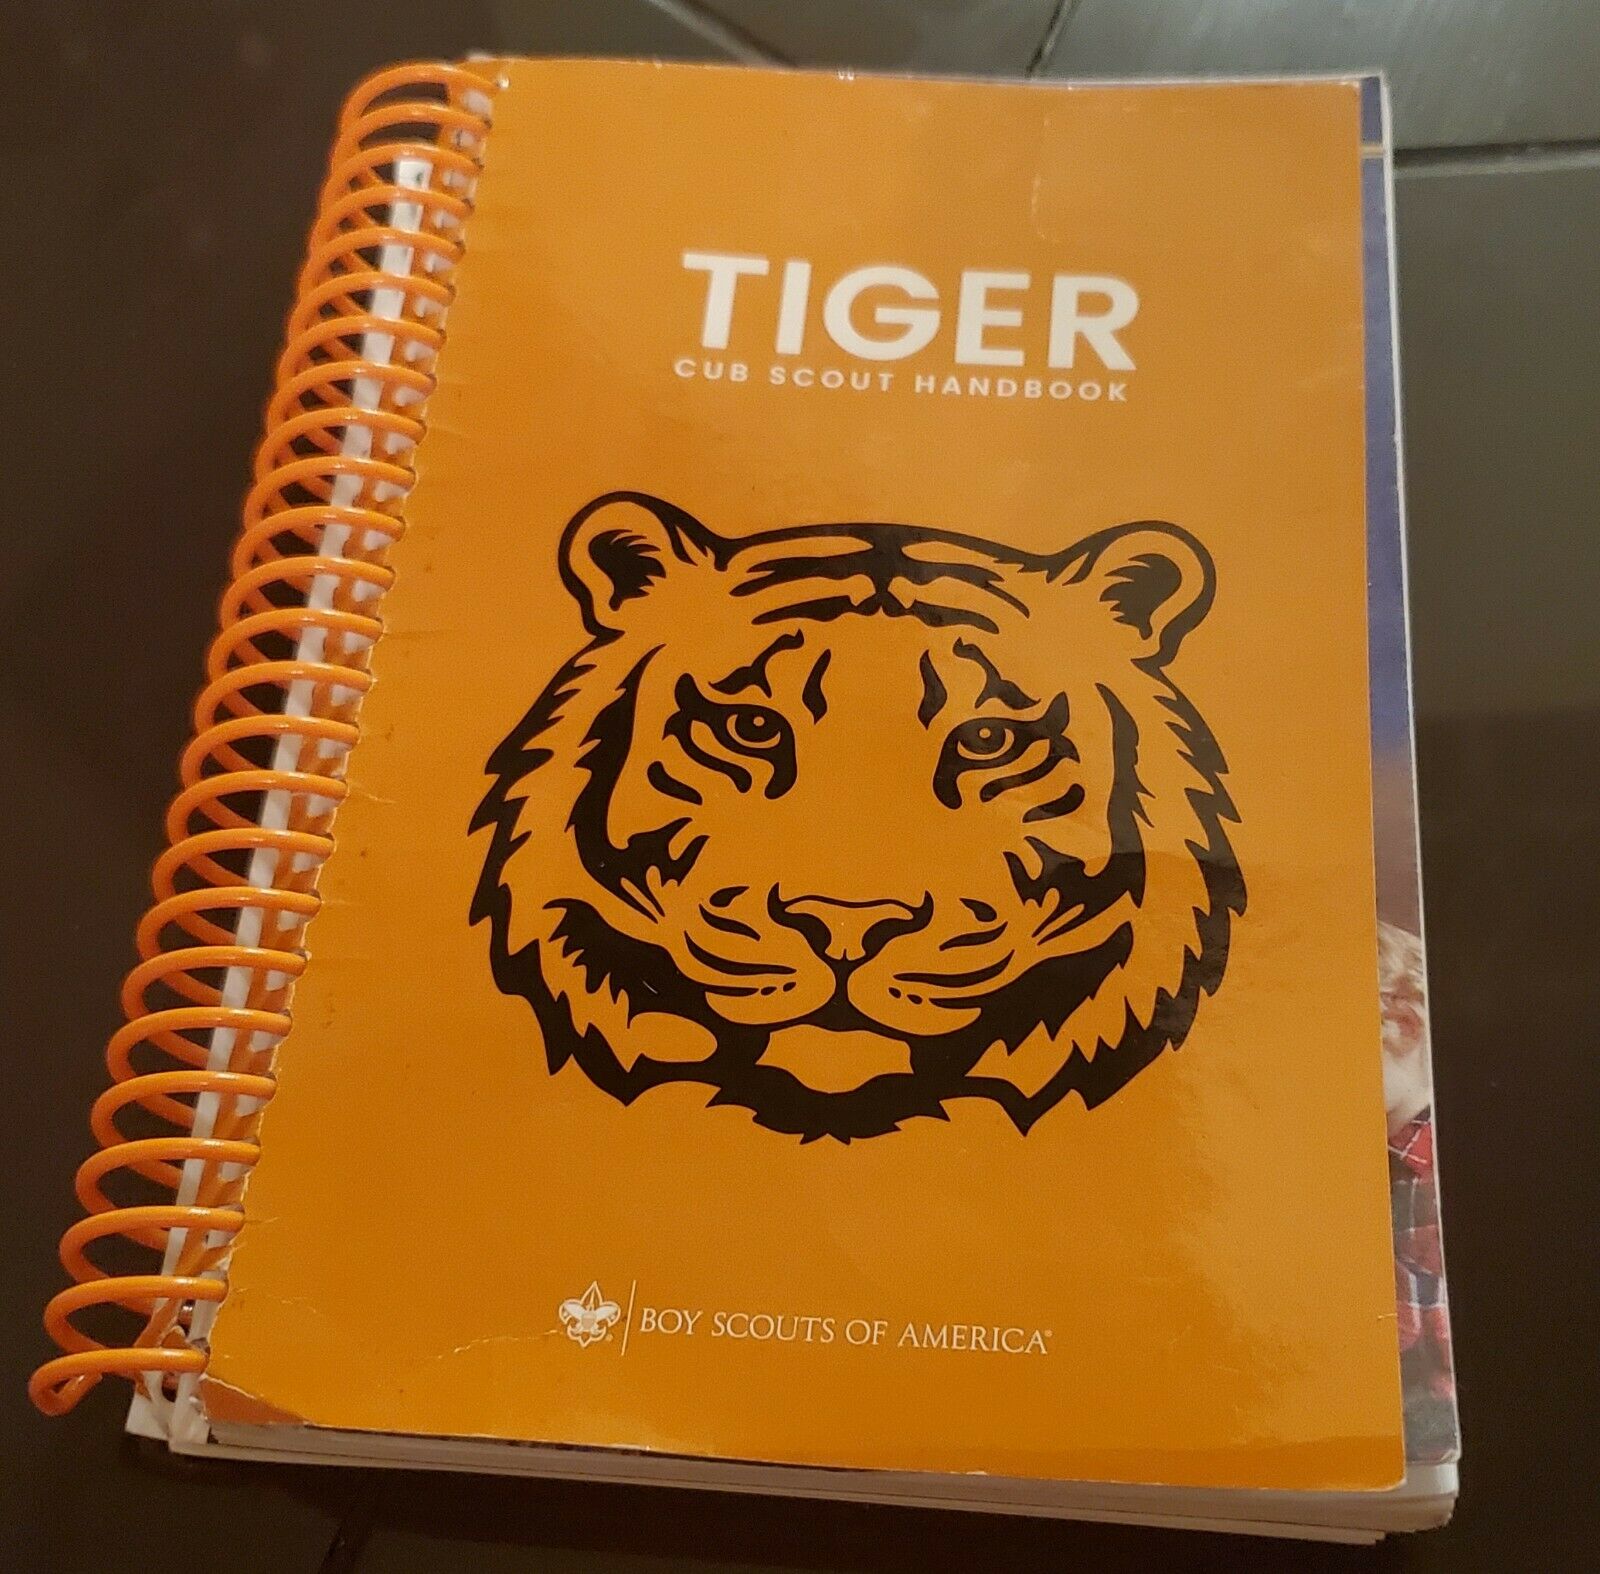 Tiger Cub Scout Coil Bound Hand Book 2018 Orange Cover Vg++